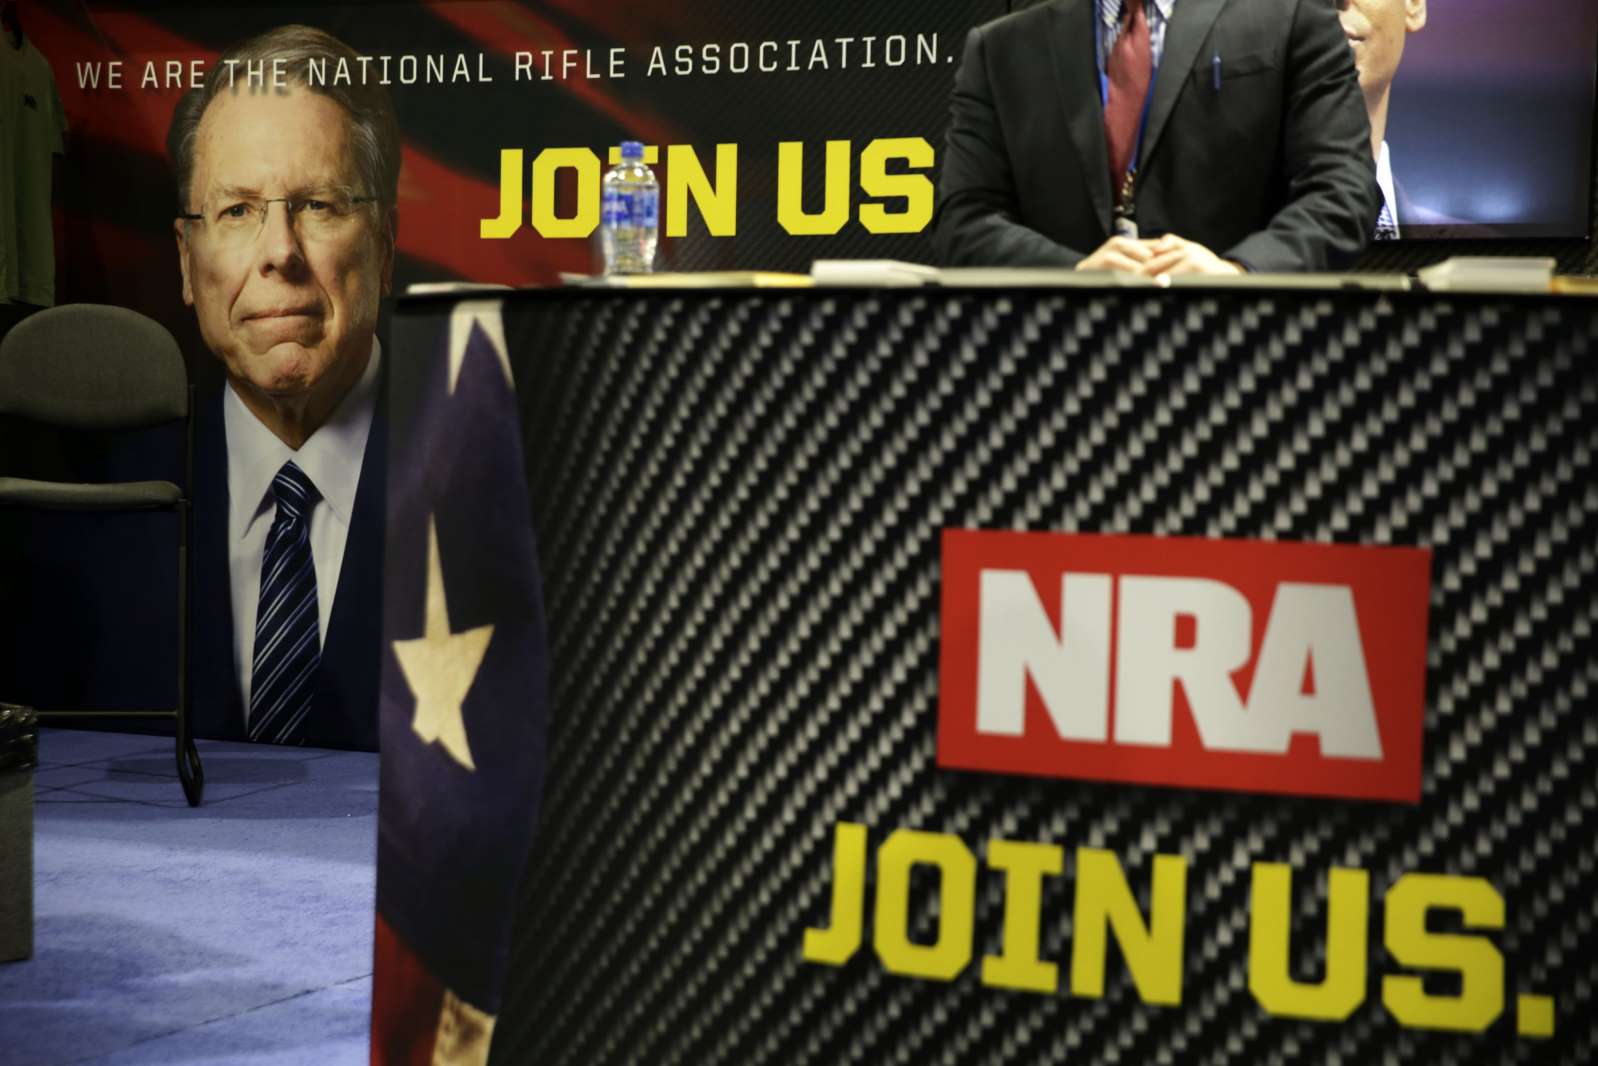 Wayne LaPierre wearing a suit and tie: The National Rifle Association (NRA) has filed for voluntary bankruptcy and vowed to reincorporate in Texas.